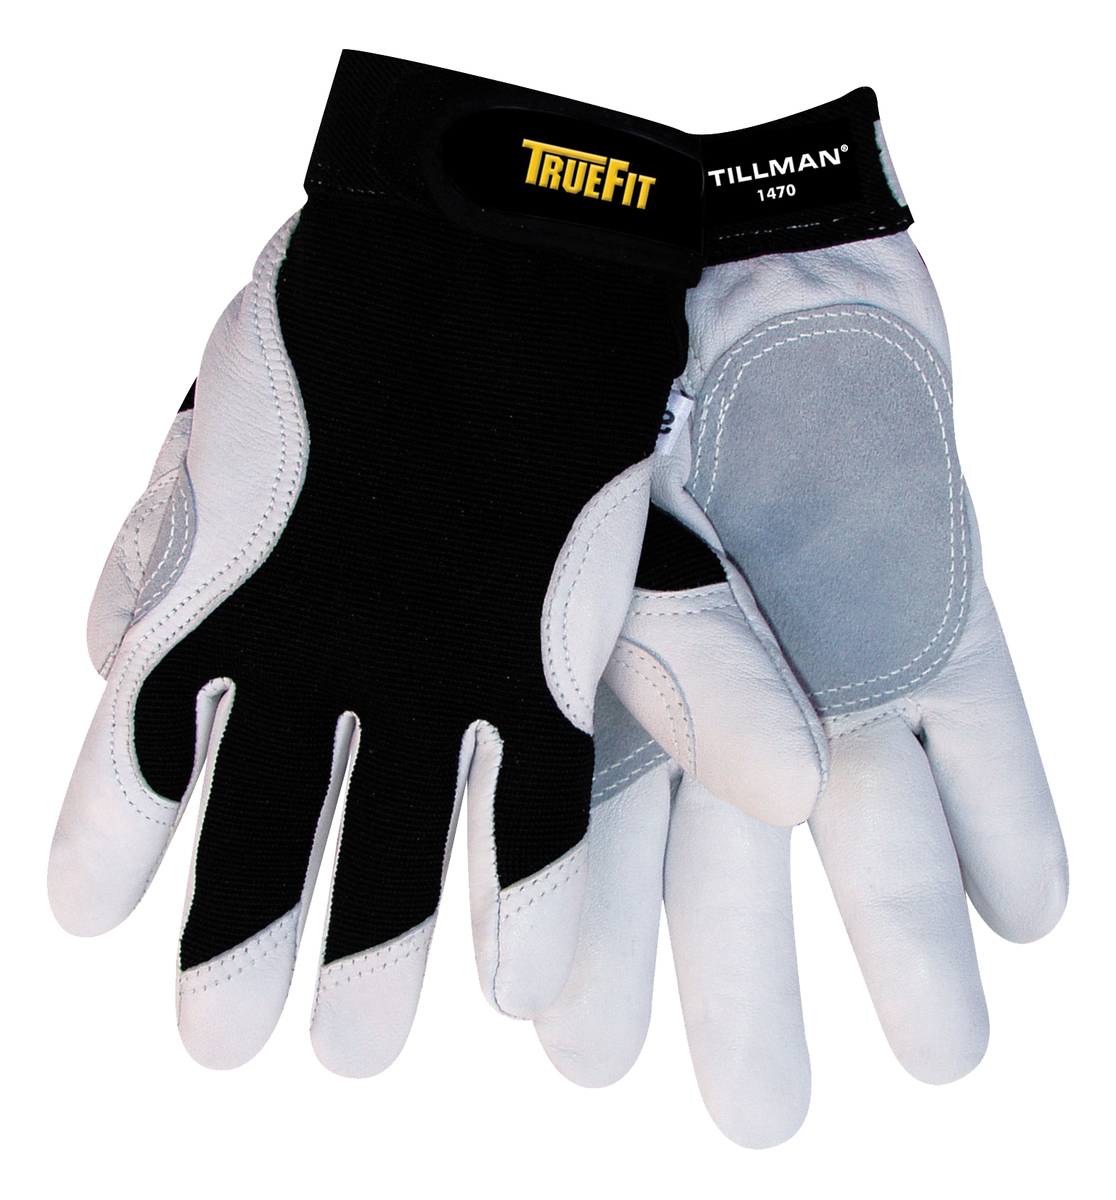 Tillman® Small White And Black TrueFit™ Goatskin And Spandex® Full Finger Mechanics Gloves With Elastic/Hook And Loop Cuff